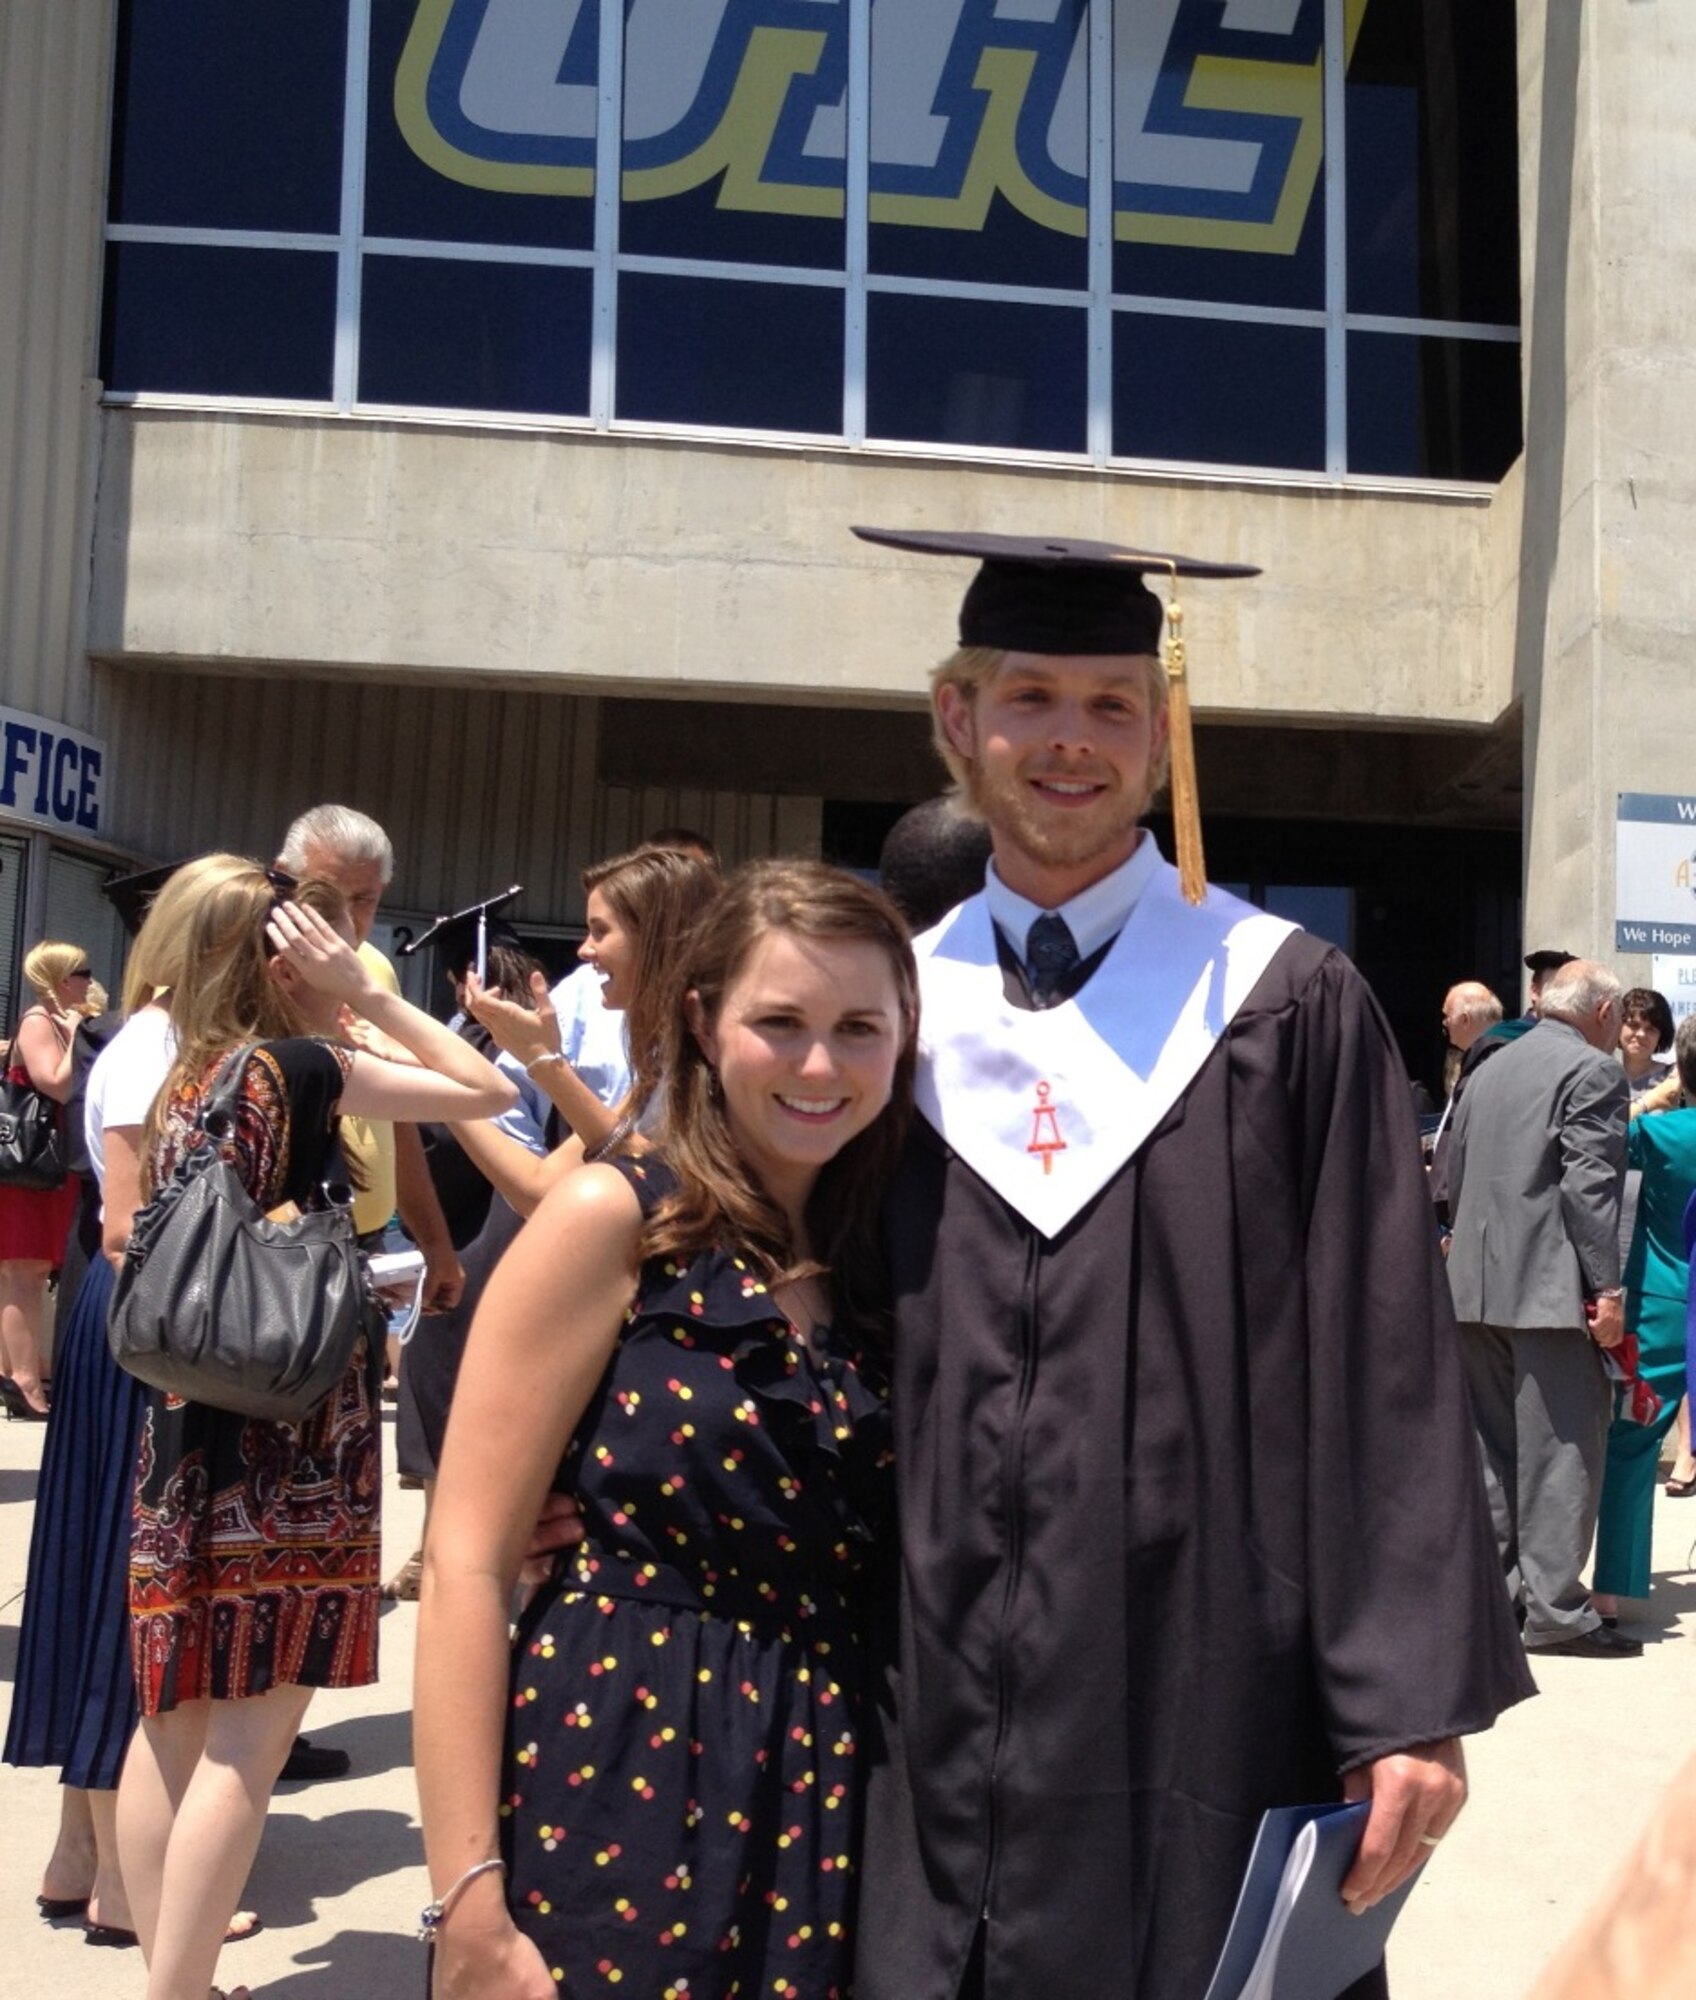 From left, Amanda Wiser poses for a photo with her husband, Aaron Wiser, who graduated May 5 from the University of Tennessee at Chattanooga with a bachelor’s degree in mechanical engineering. Aaron has worked at AEDC as an ATA Design Engineering Branch draftsman since 2005. (Photo provided)